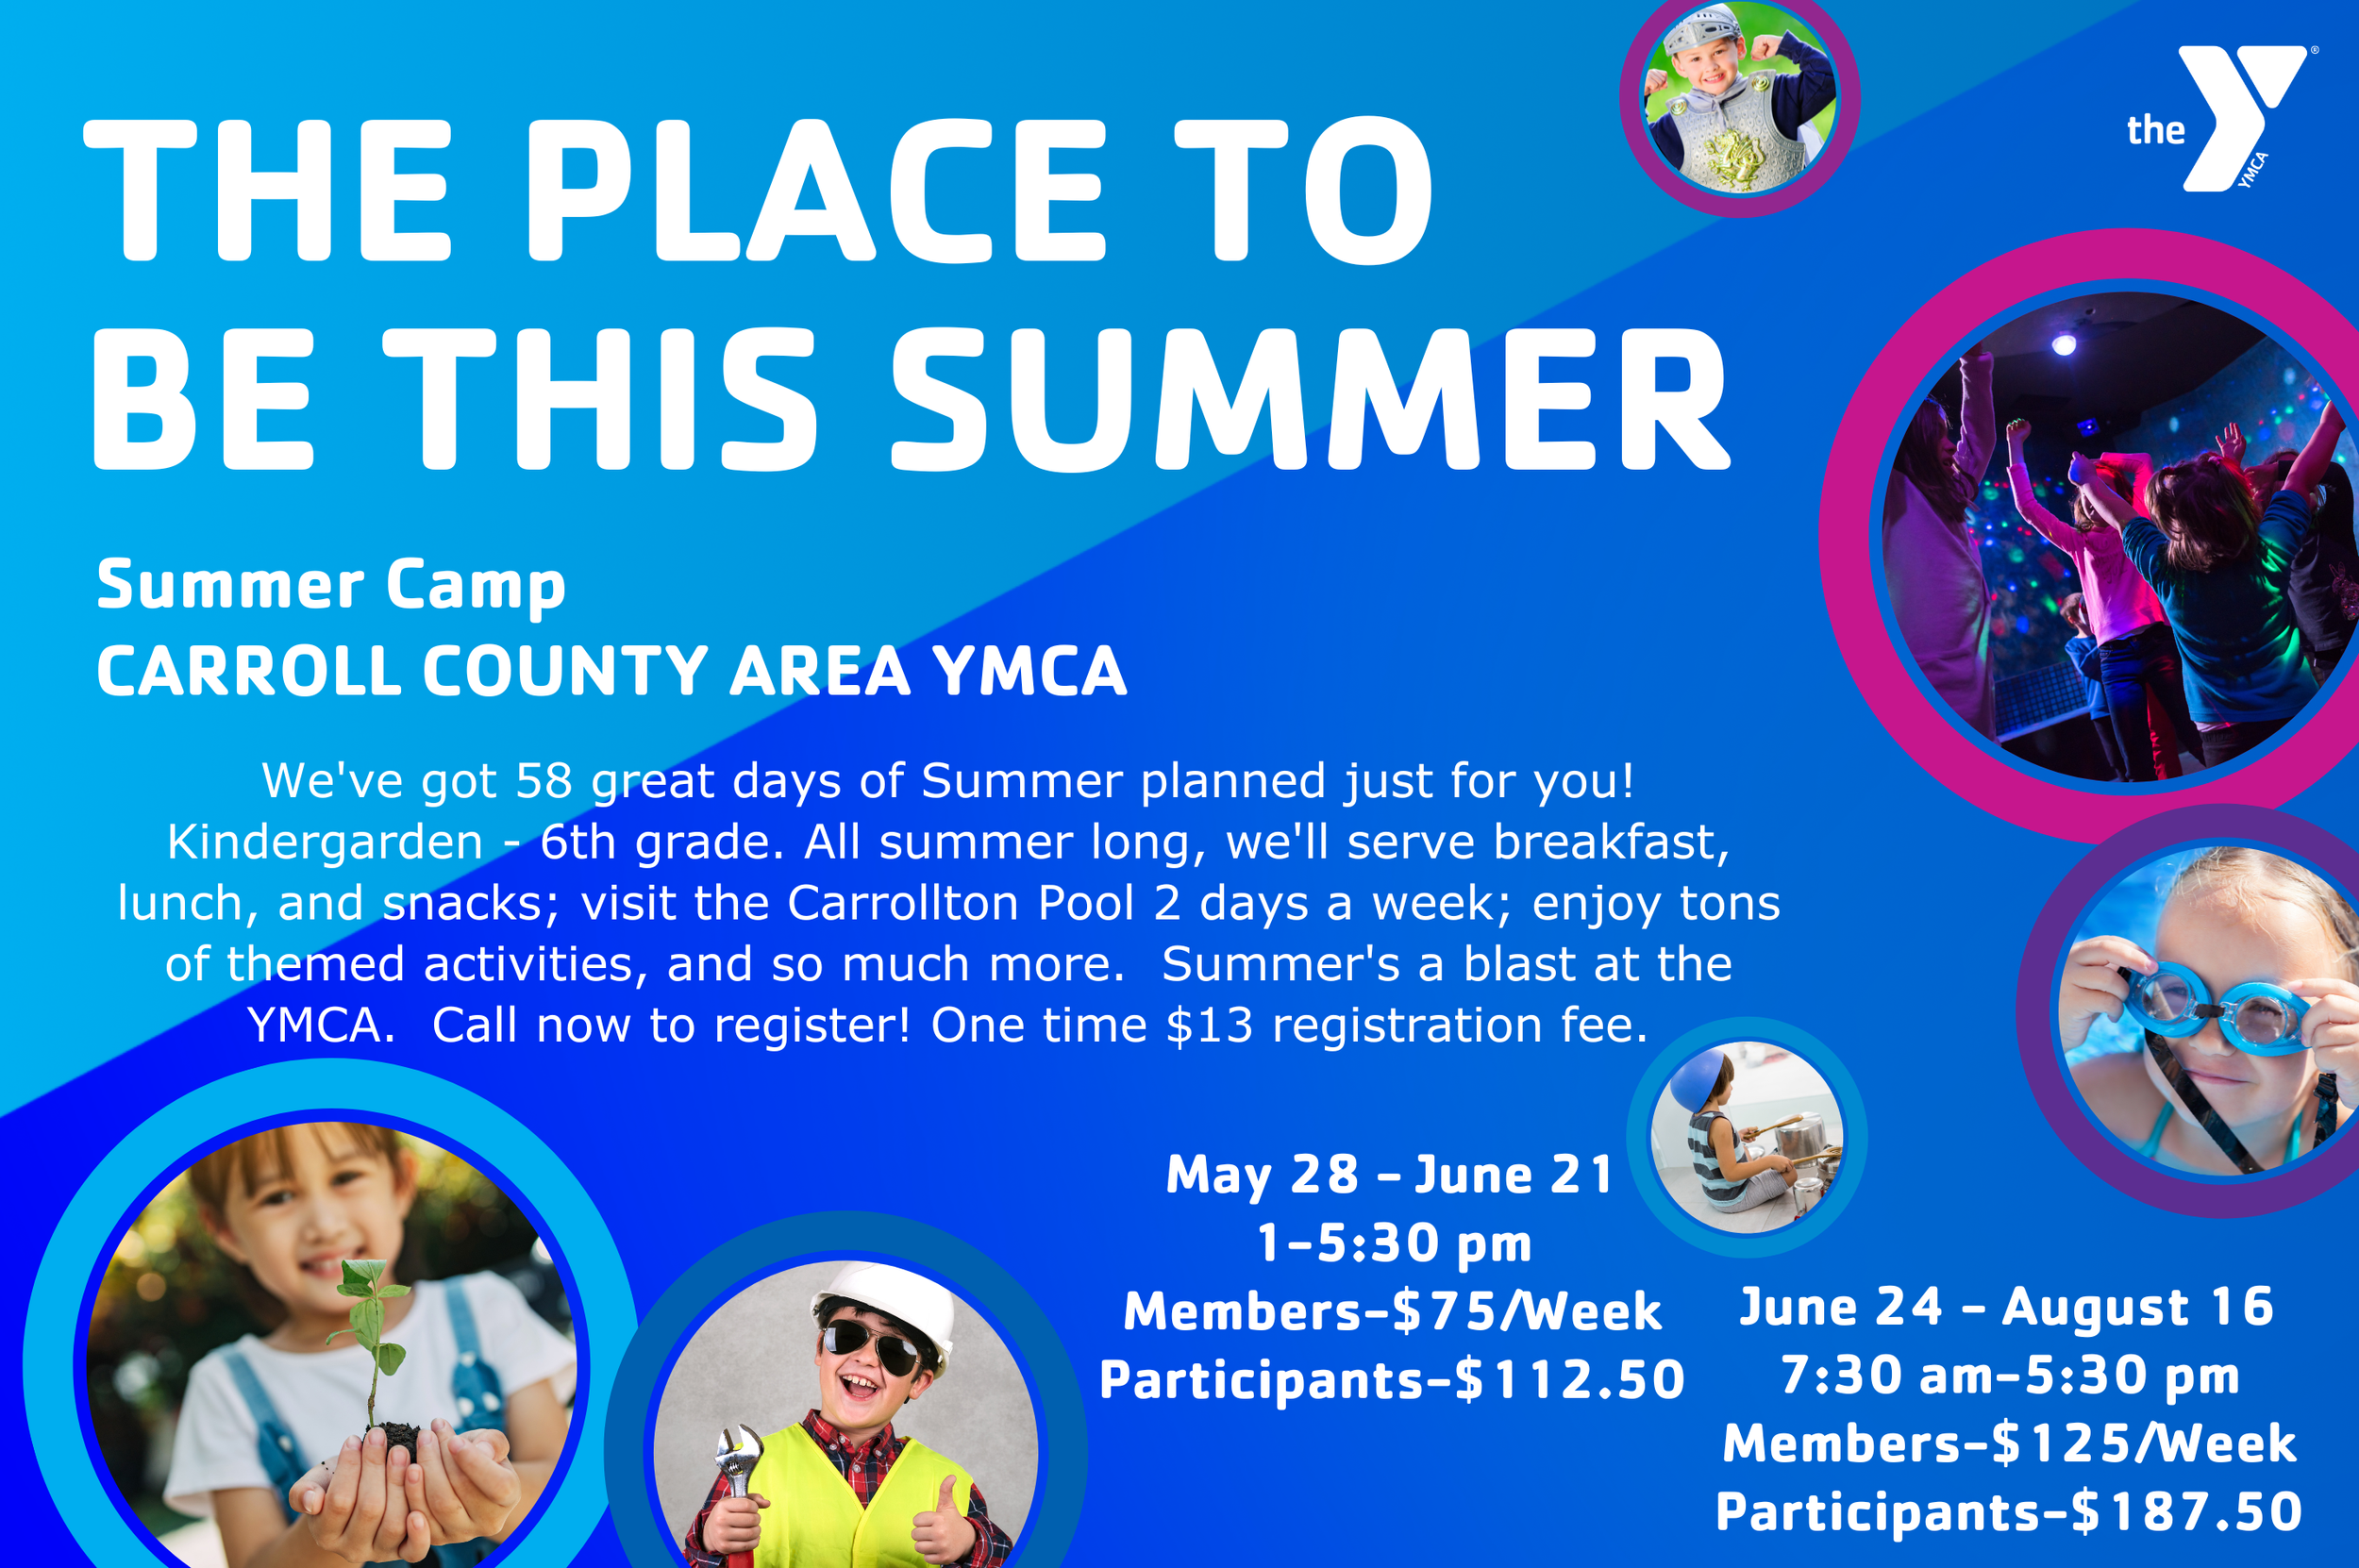 2023-cc-SUMMER CAMP (2858 × 1900 px) (9).png